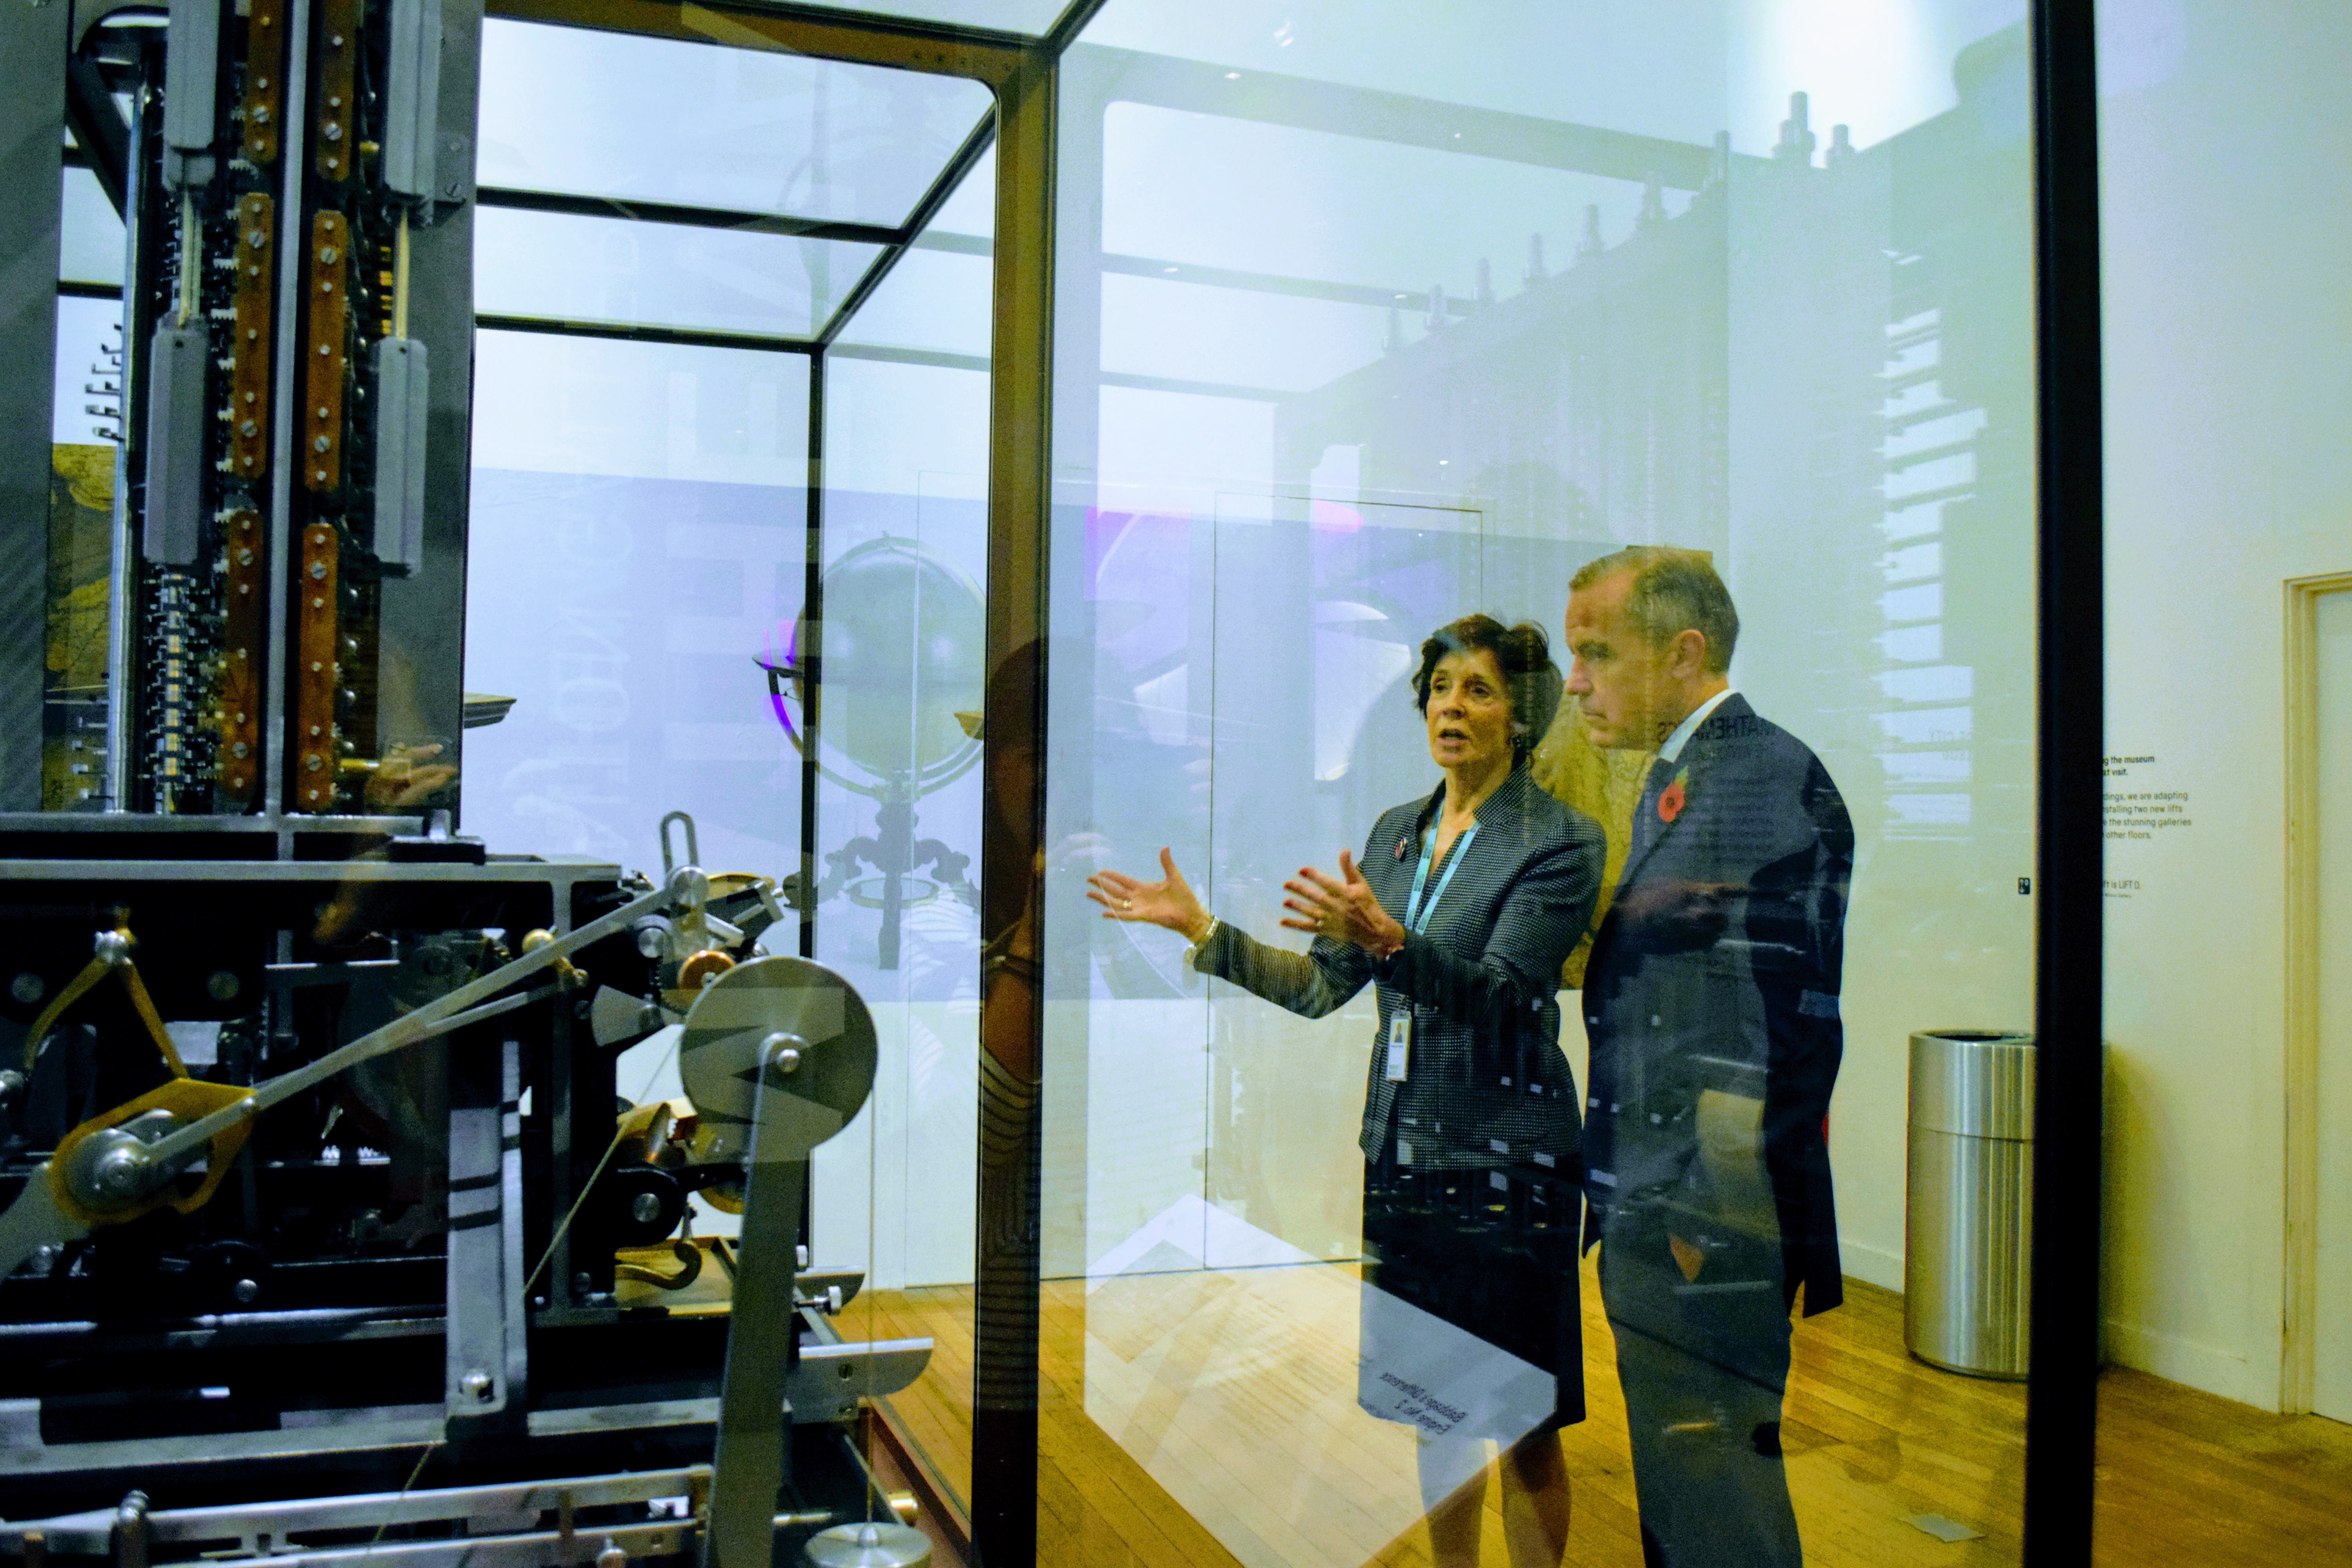 Dame Mary Archer, Chair of the Board of Trustees of the Science Museum shows Bank of England Governor Mark Carney around the Science Museum © Lopa Patel